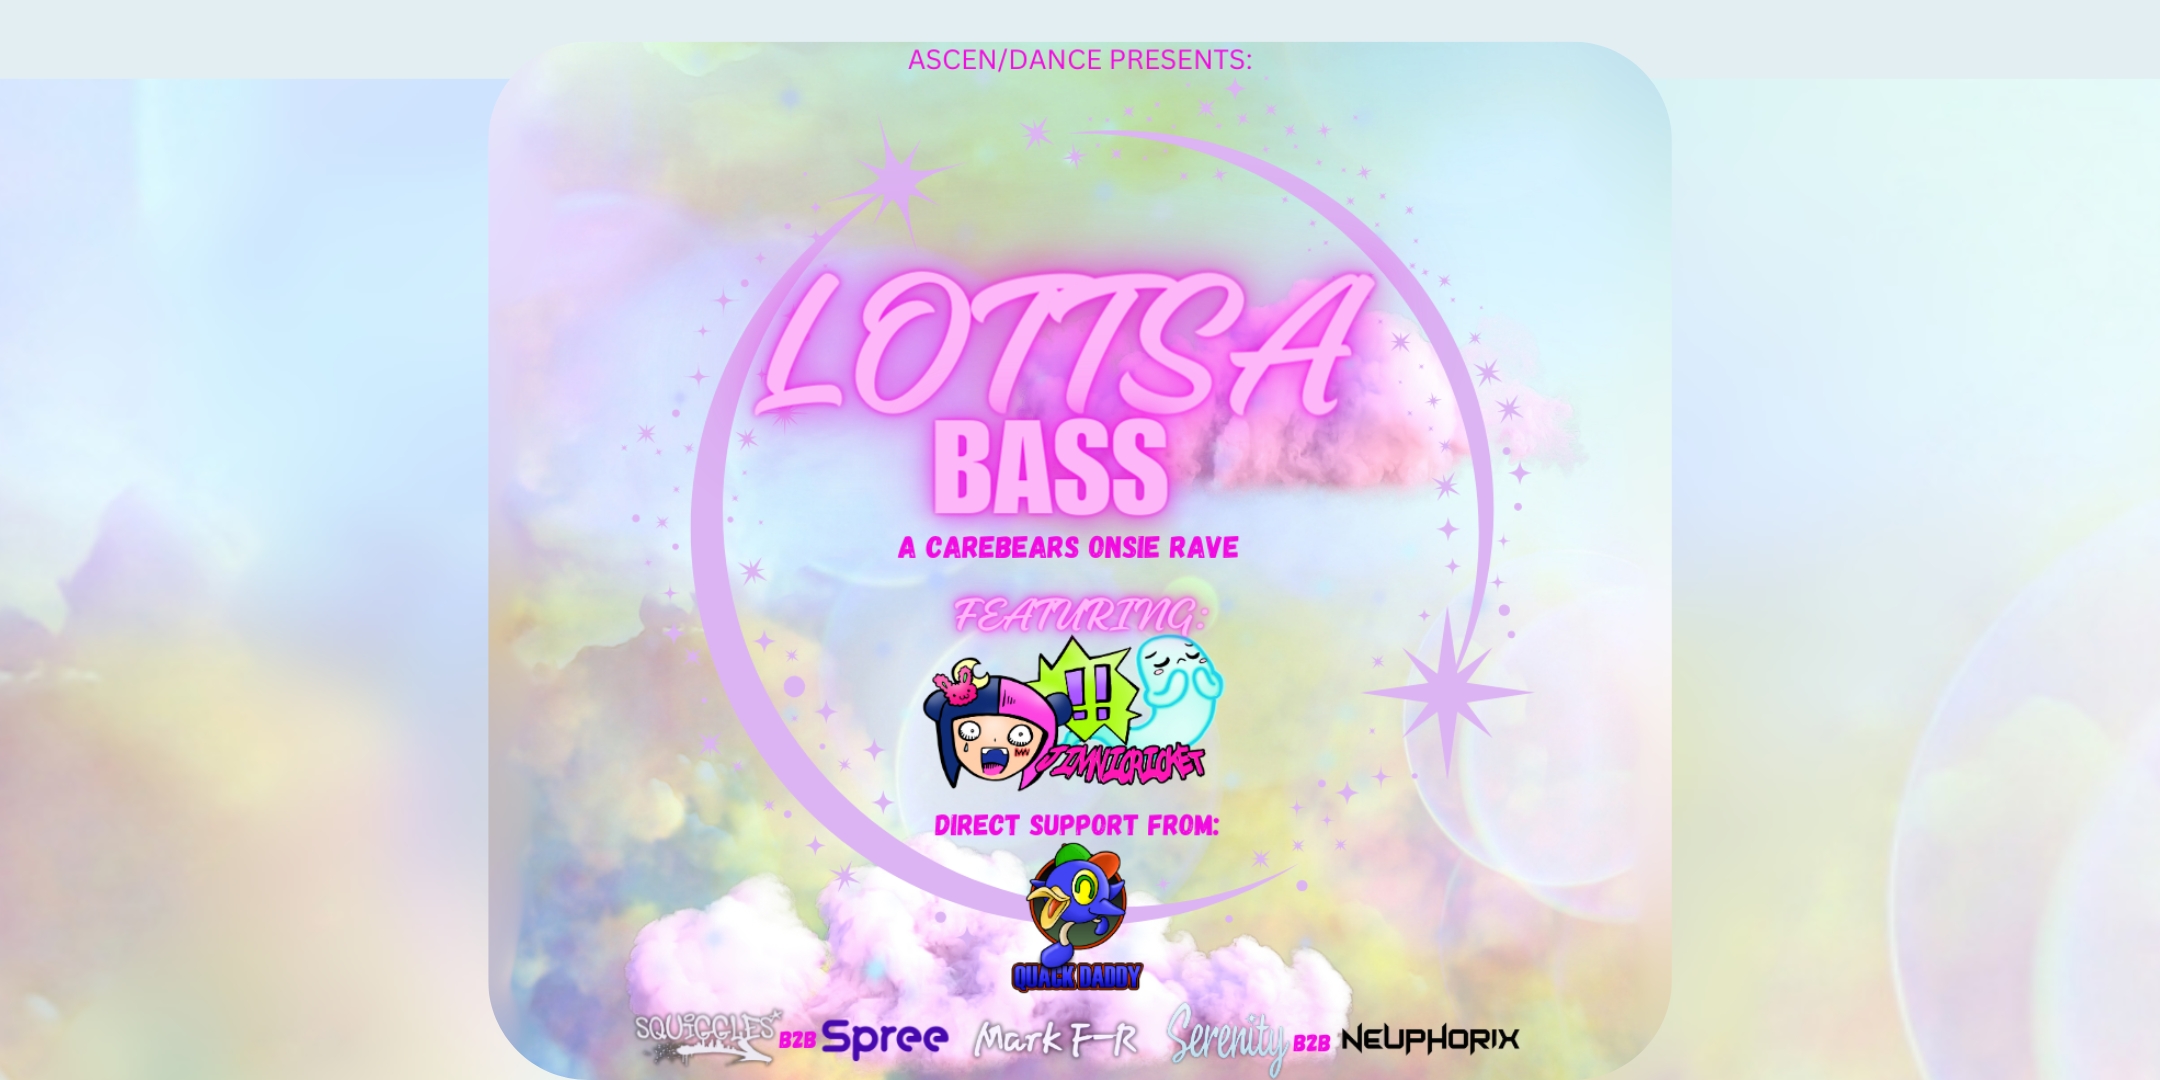 Ascen/Dance Presents: LOTTSA BASS A CARE BEARS ONESIE RAVE Friday May 17 James Ballentine "Uptown" VFW Post 246 2916 Lyndale Ave S Mpls Doors 9pm :: Music 9pm :: 21+ GA: $10 ADV / $15 DOS